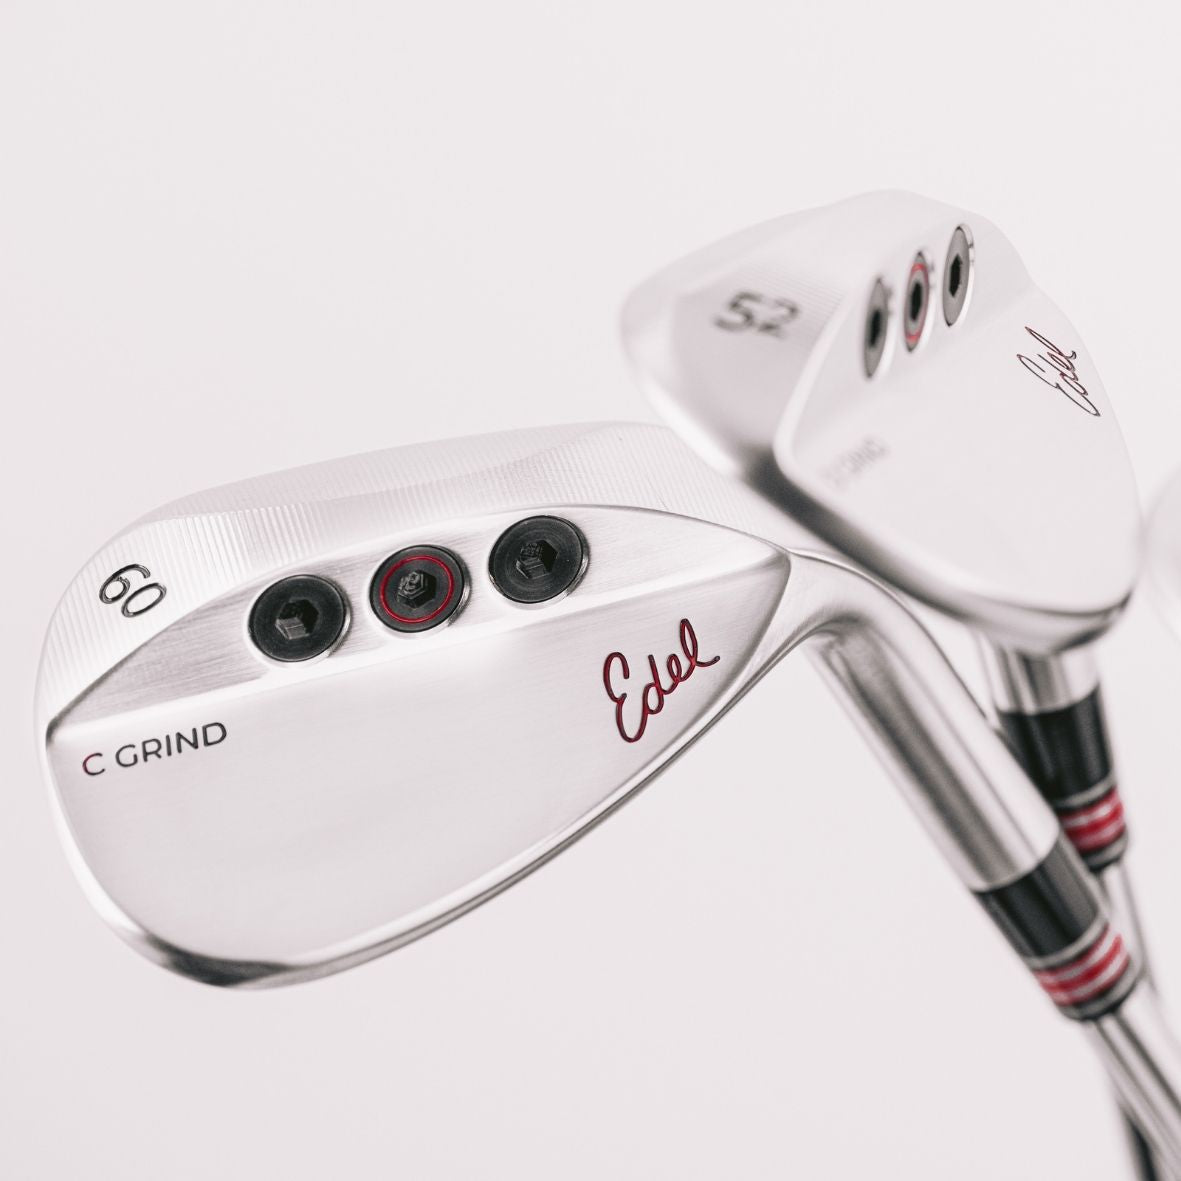 Edel SMS Wedges – The Golf Tailor